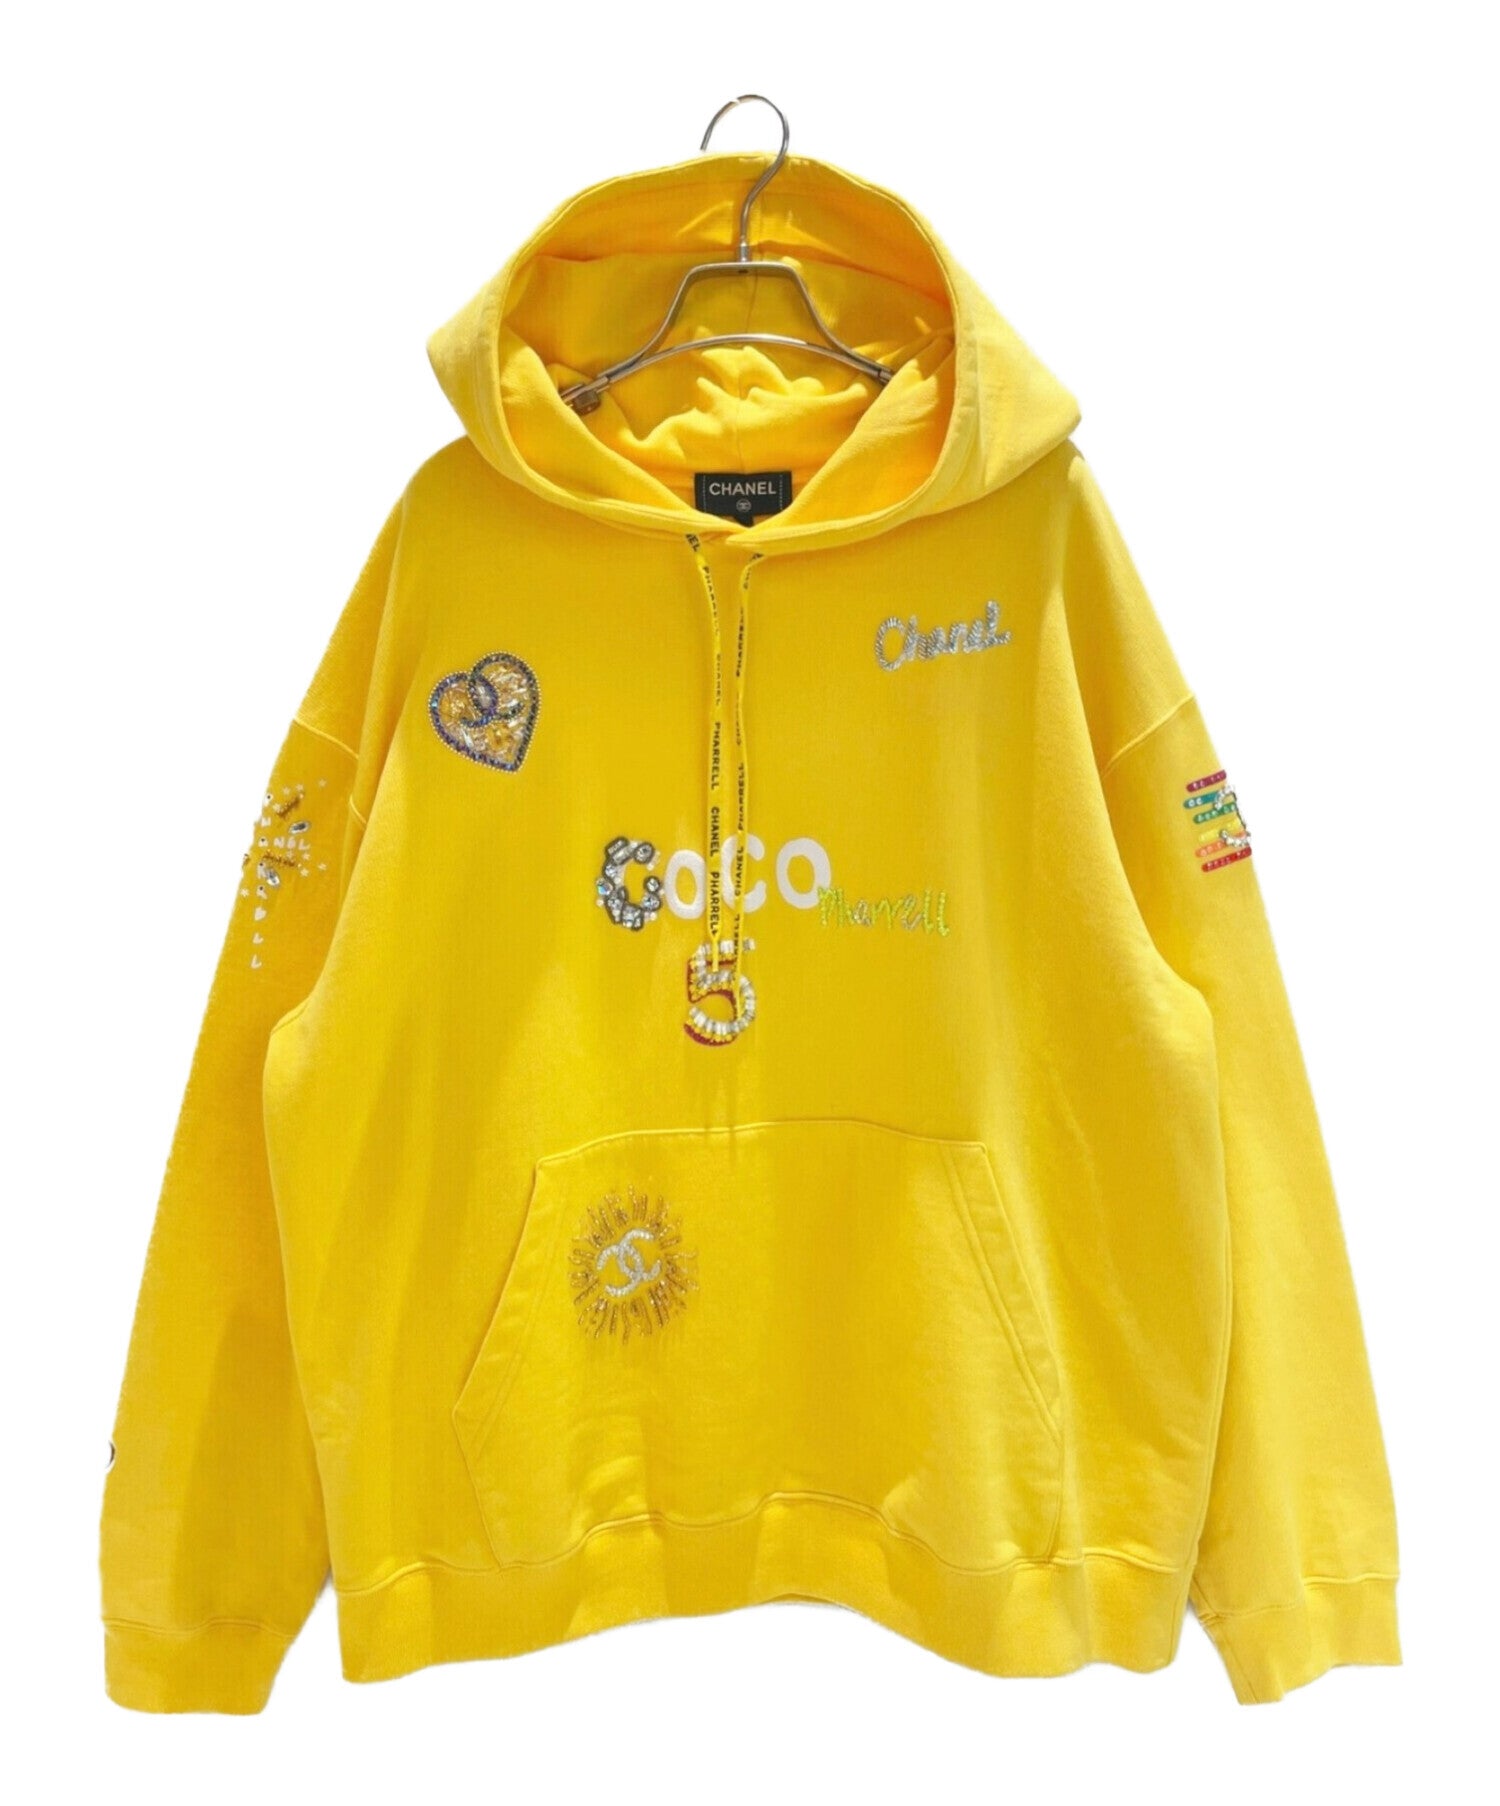 Archive Factory Chanel Pharrell Williams Hoodie Limited Collaboration